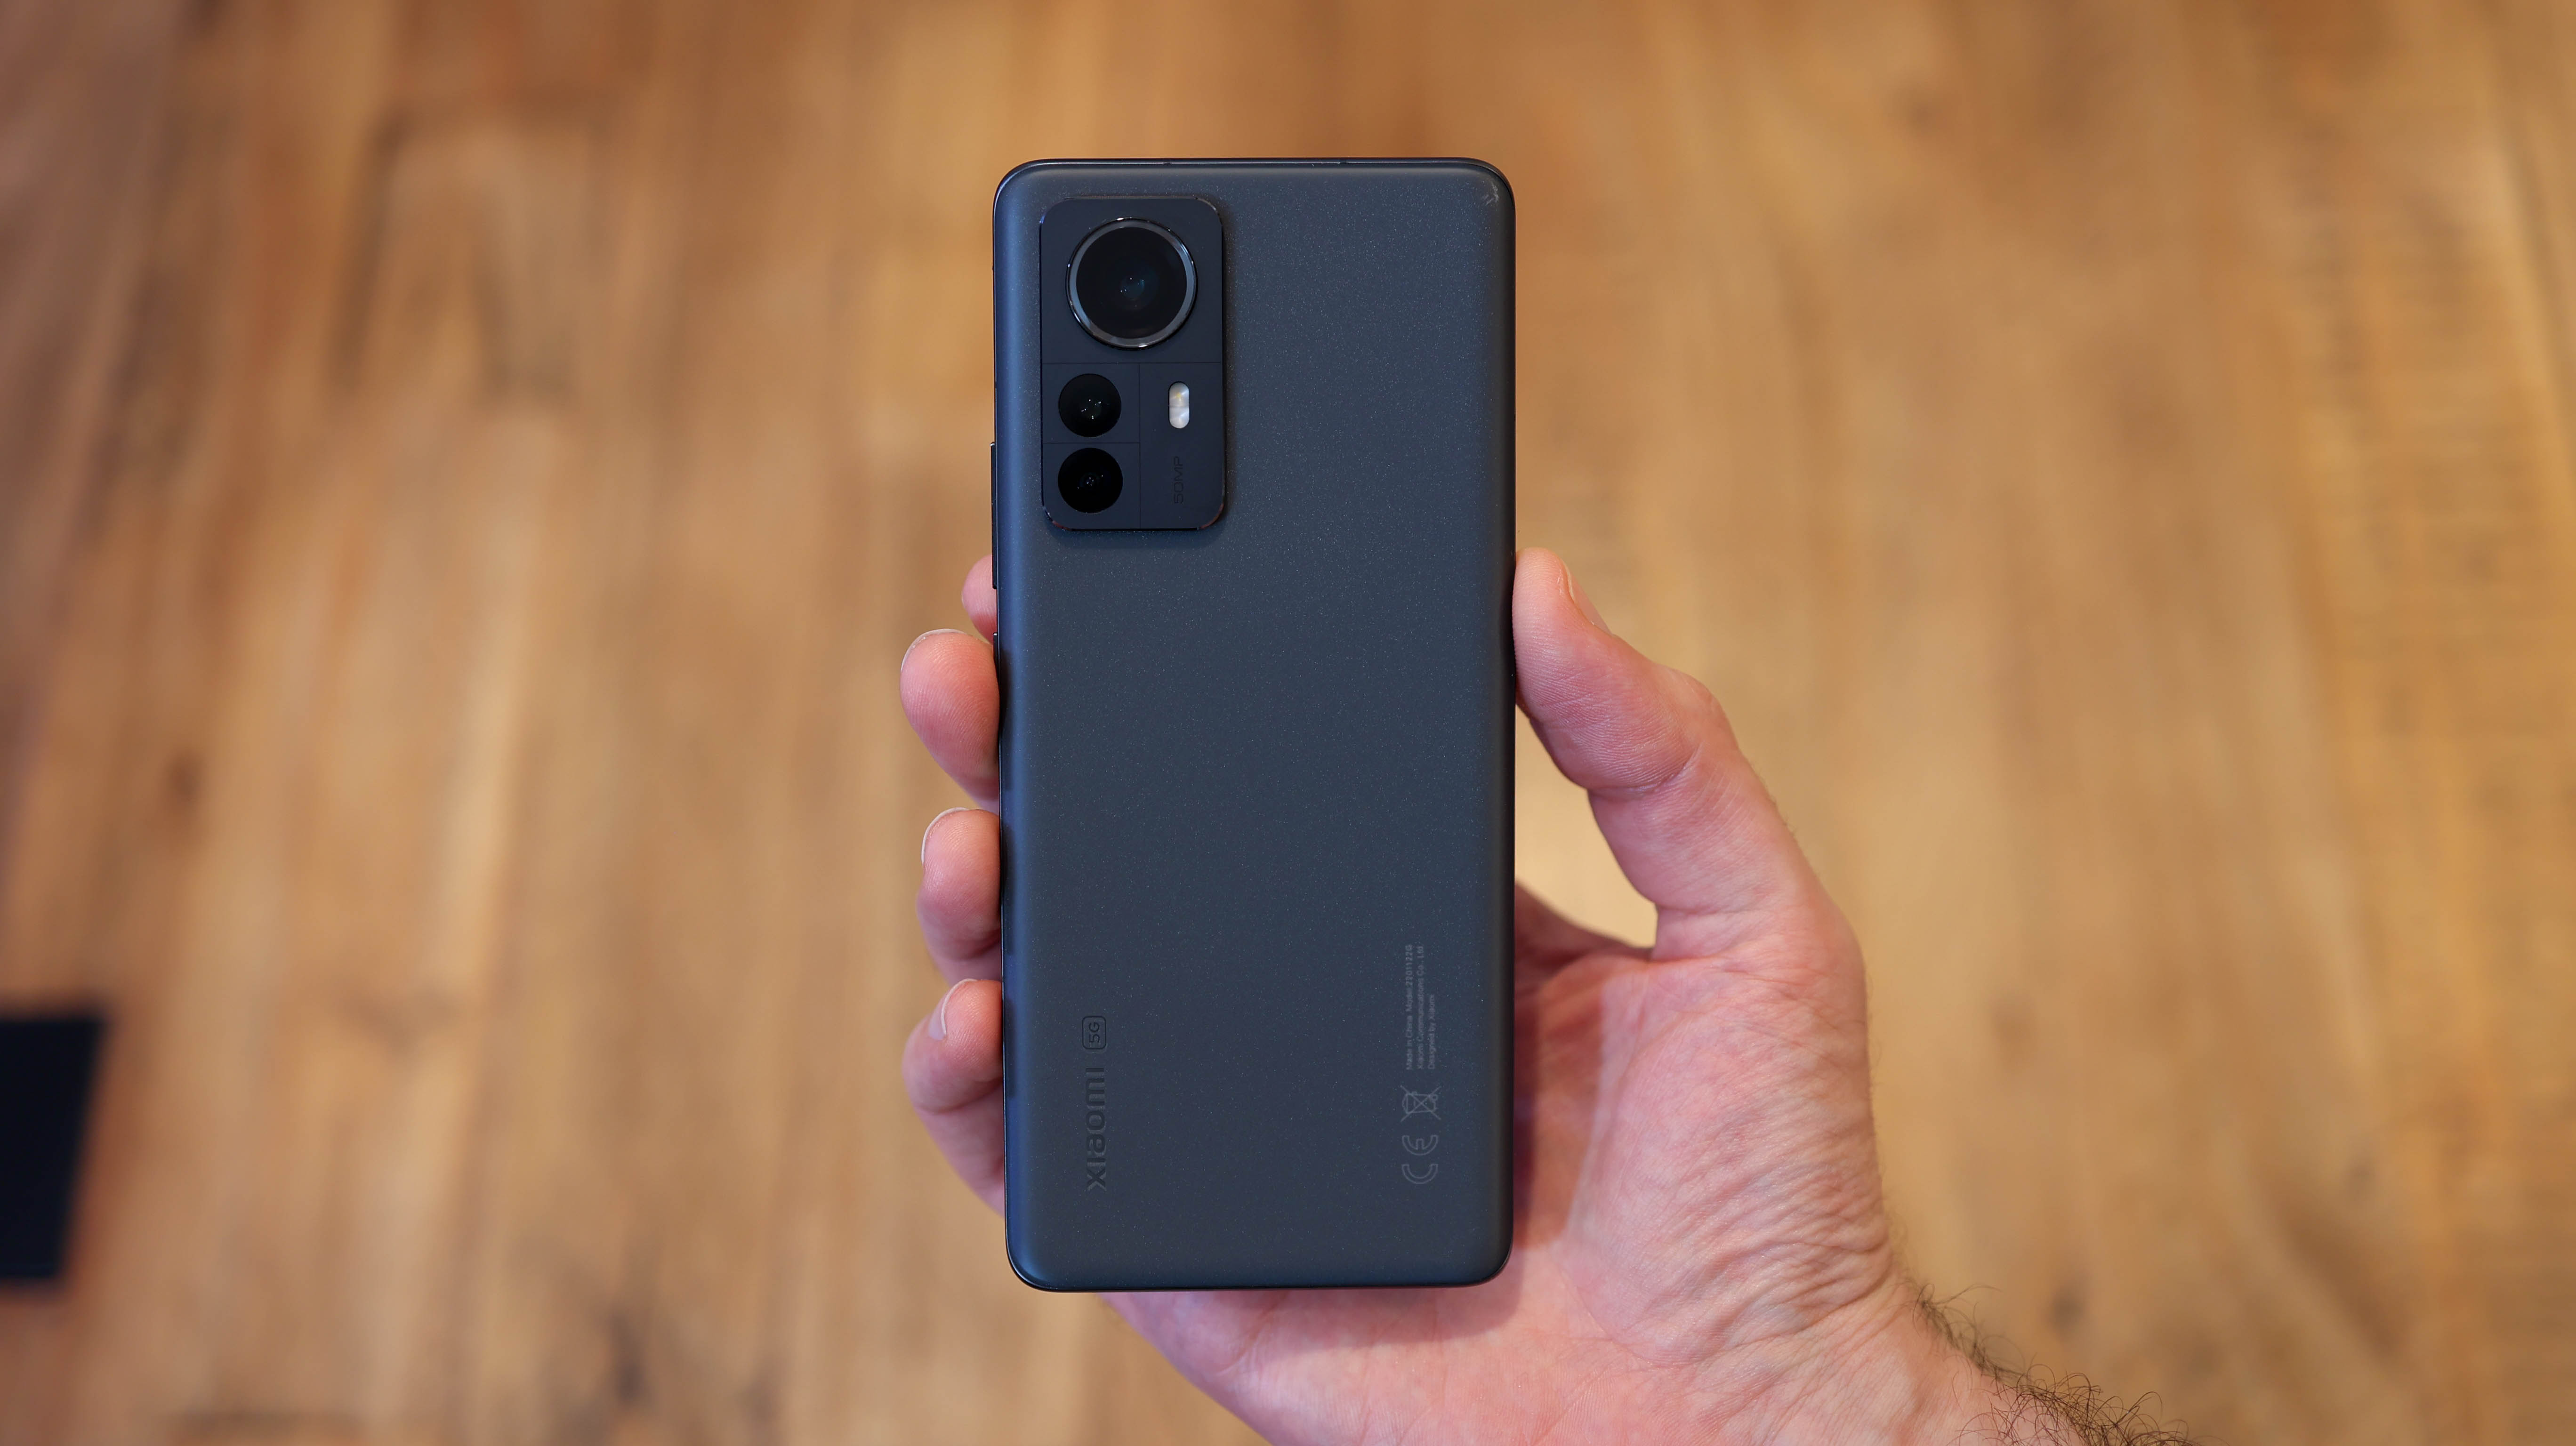 A Xiaomi 12 Pro from behind in someone's hand